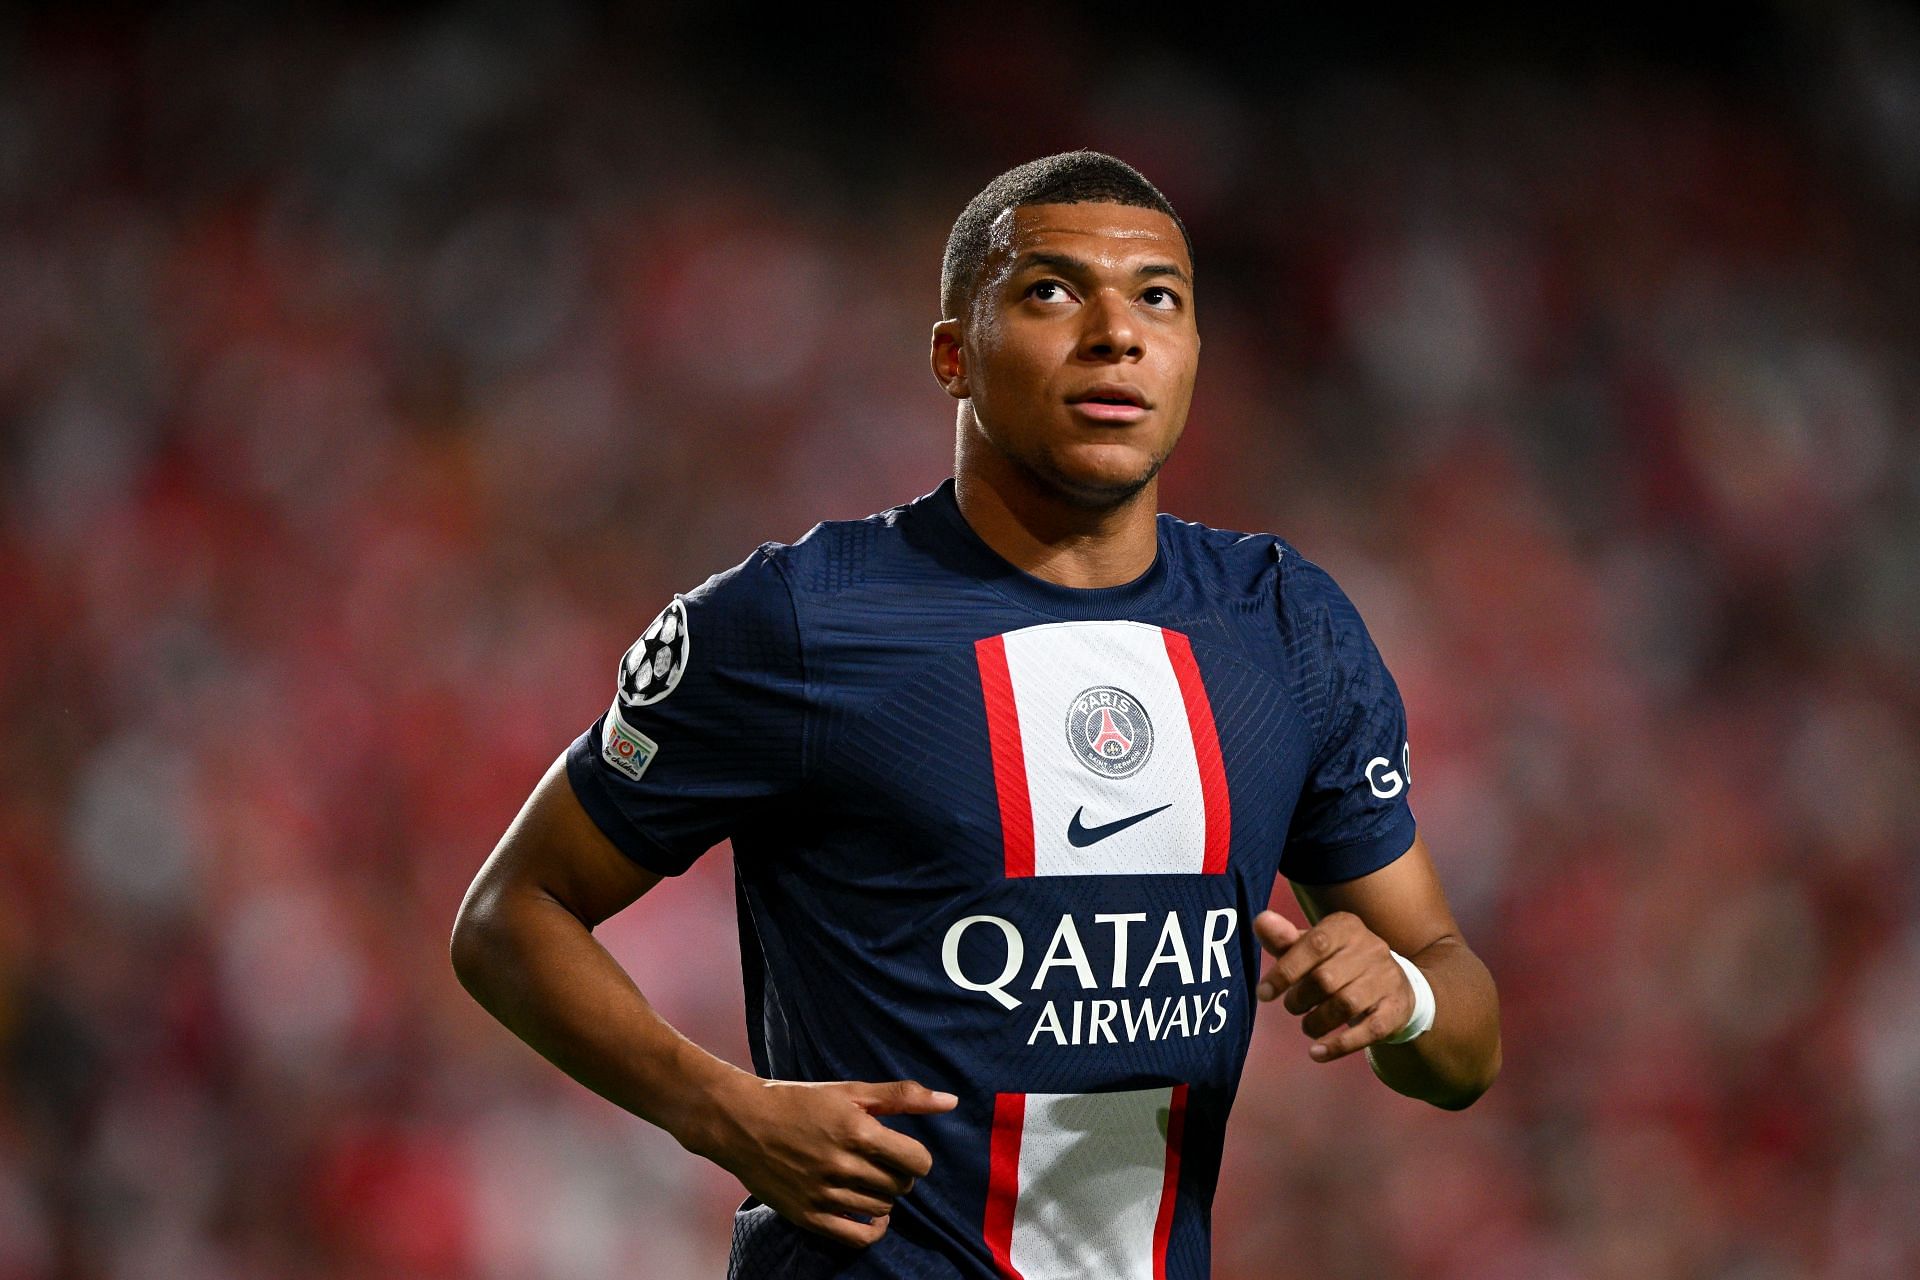 Kylian Mbappe has enjoyed a strong start to the season.